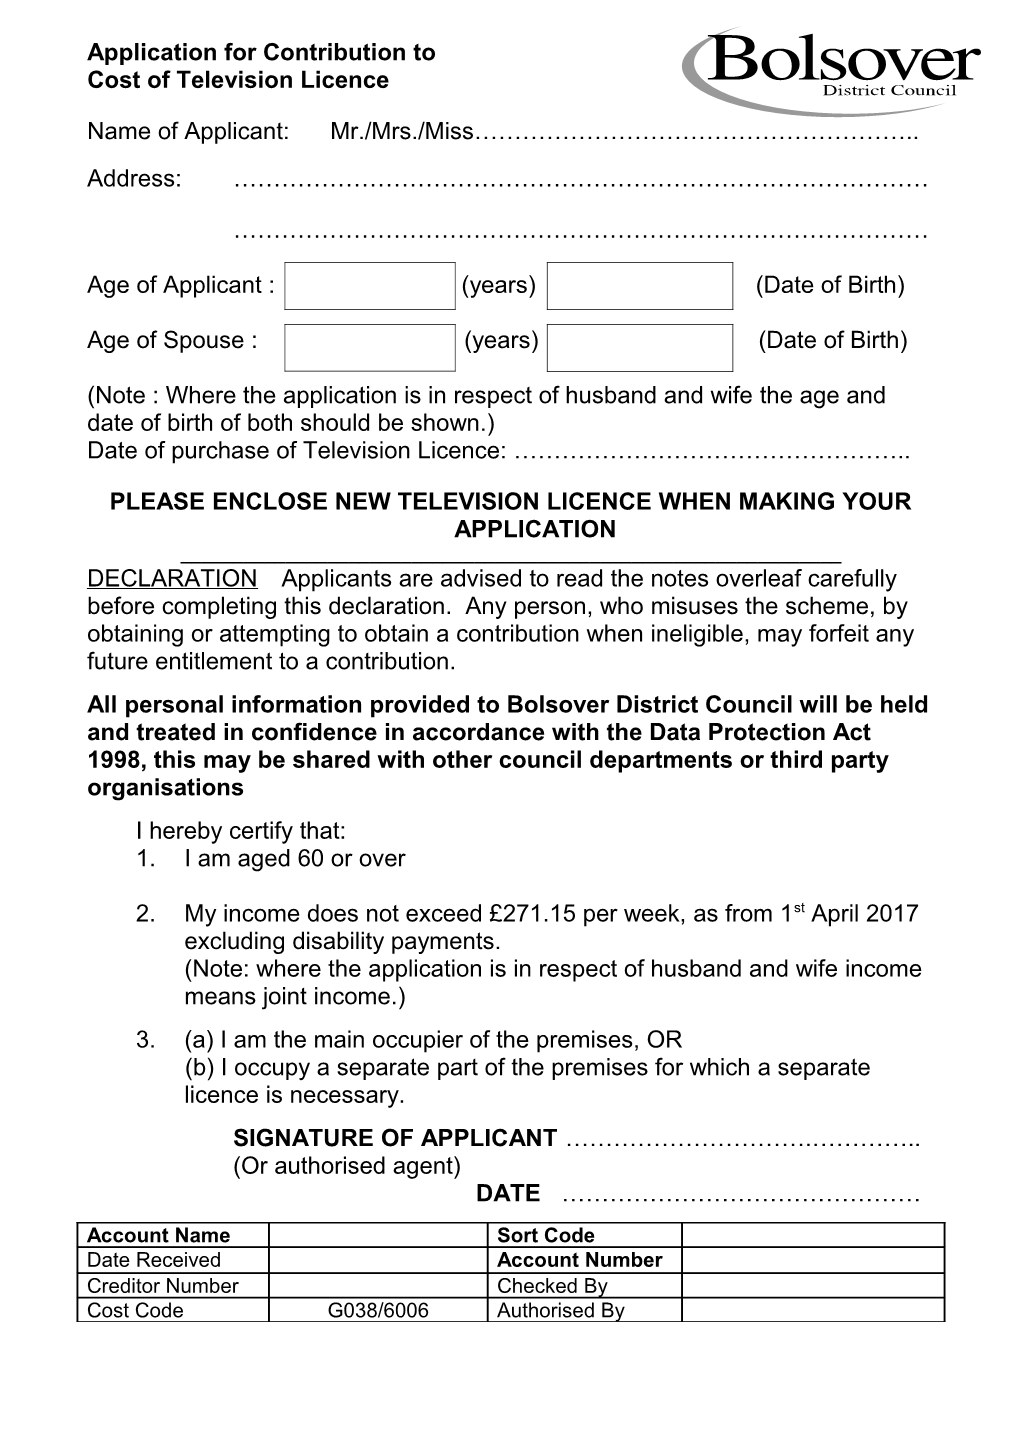 Application for Contribution to Cost of Television Licence